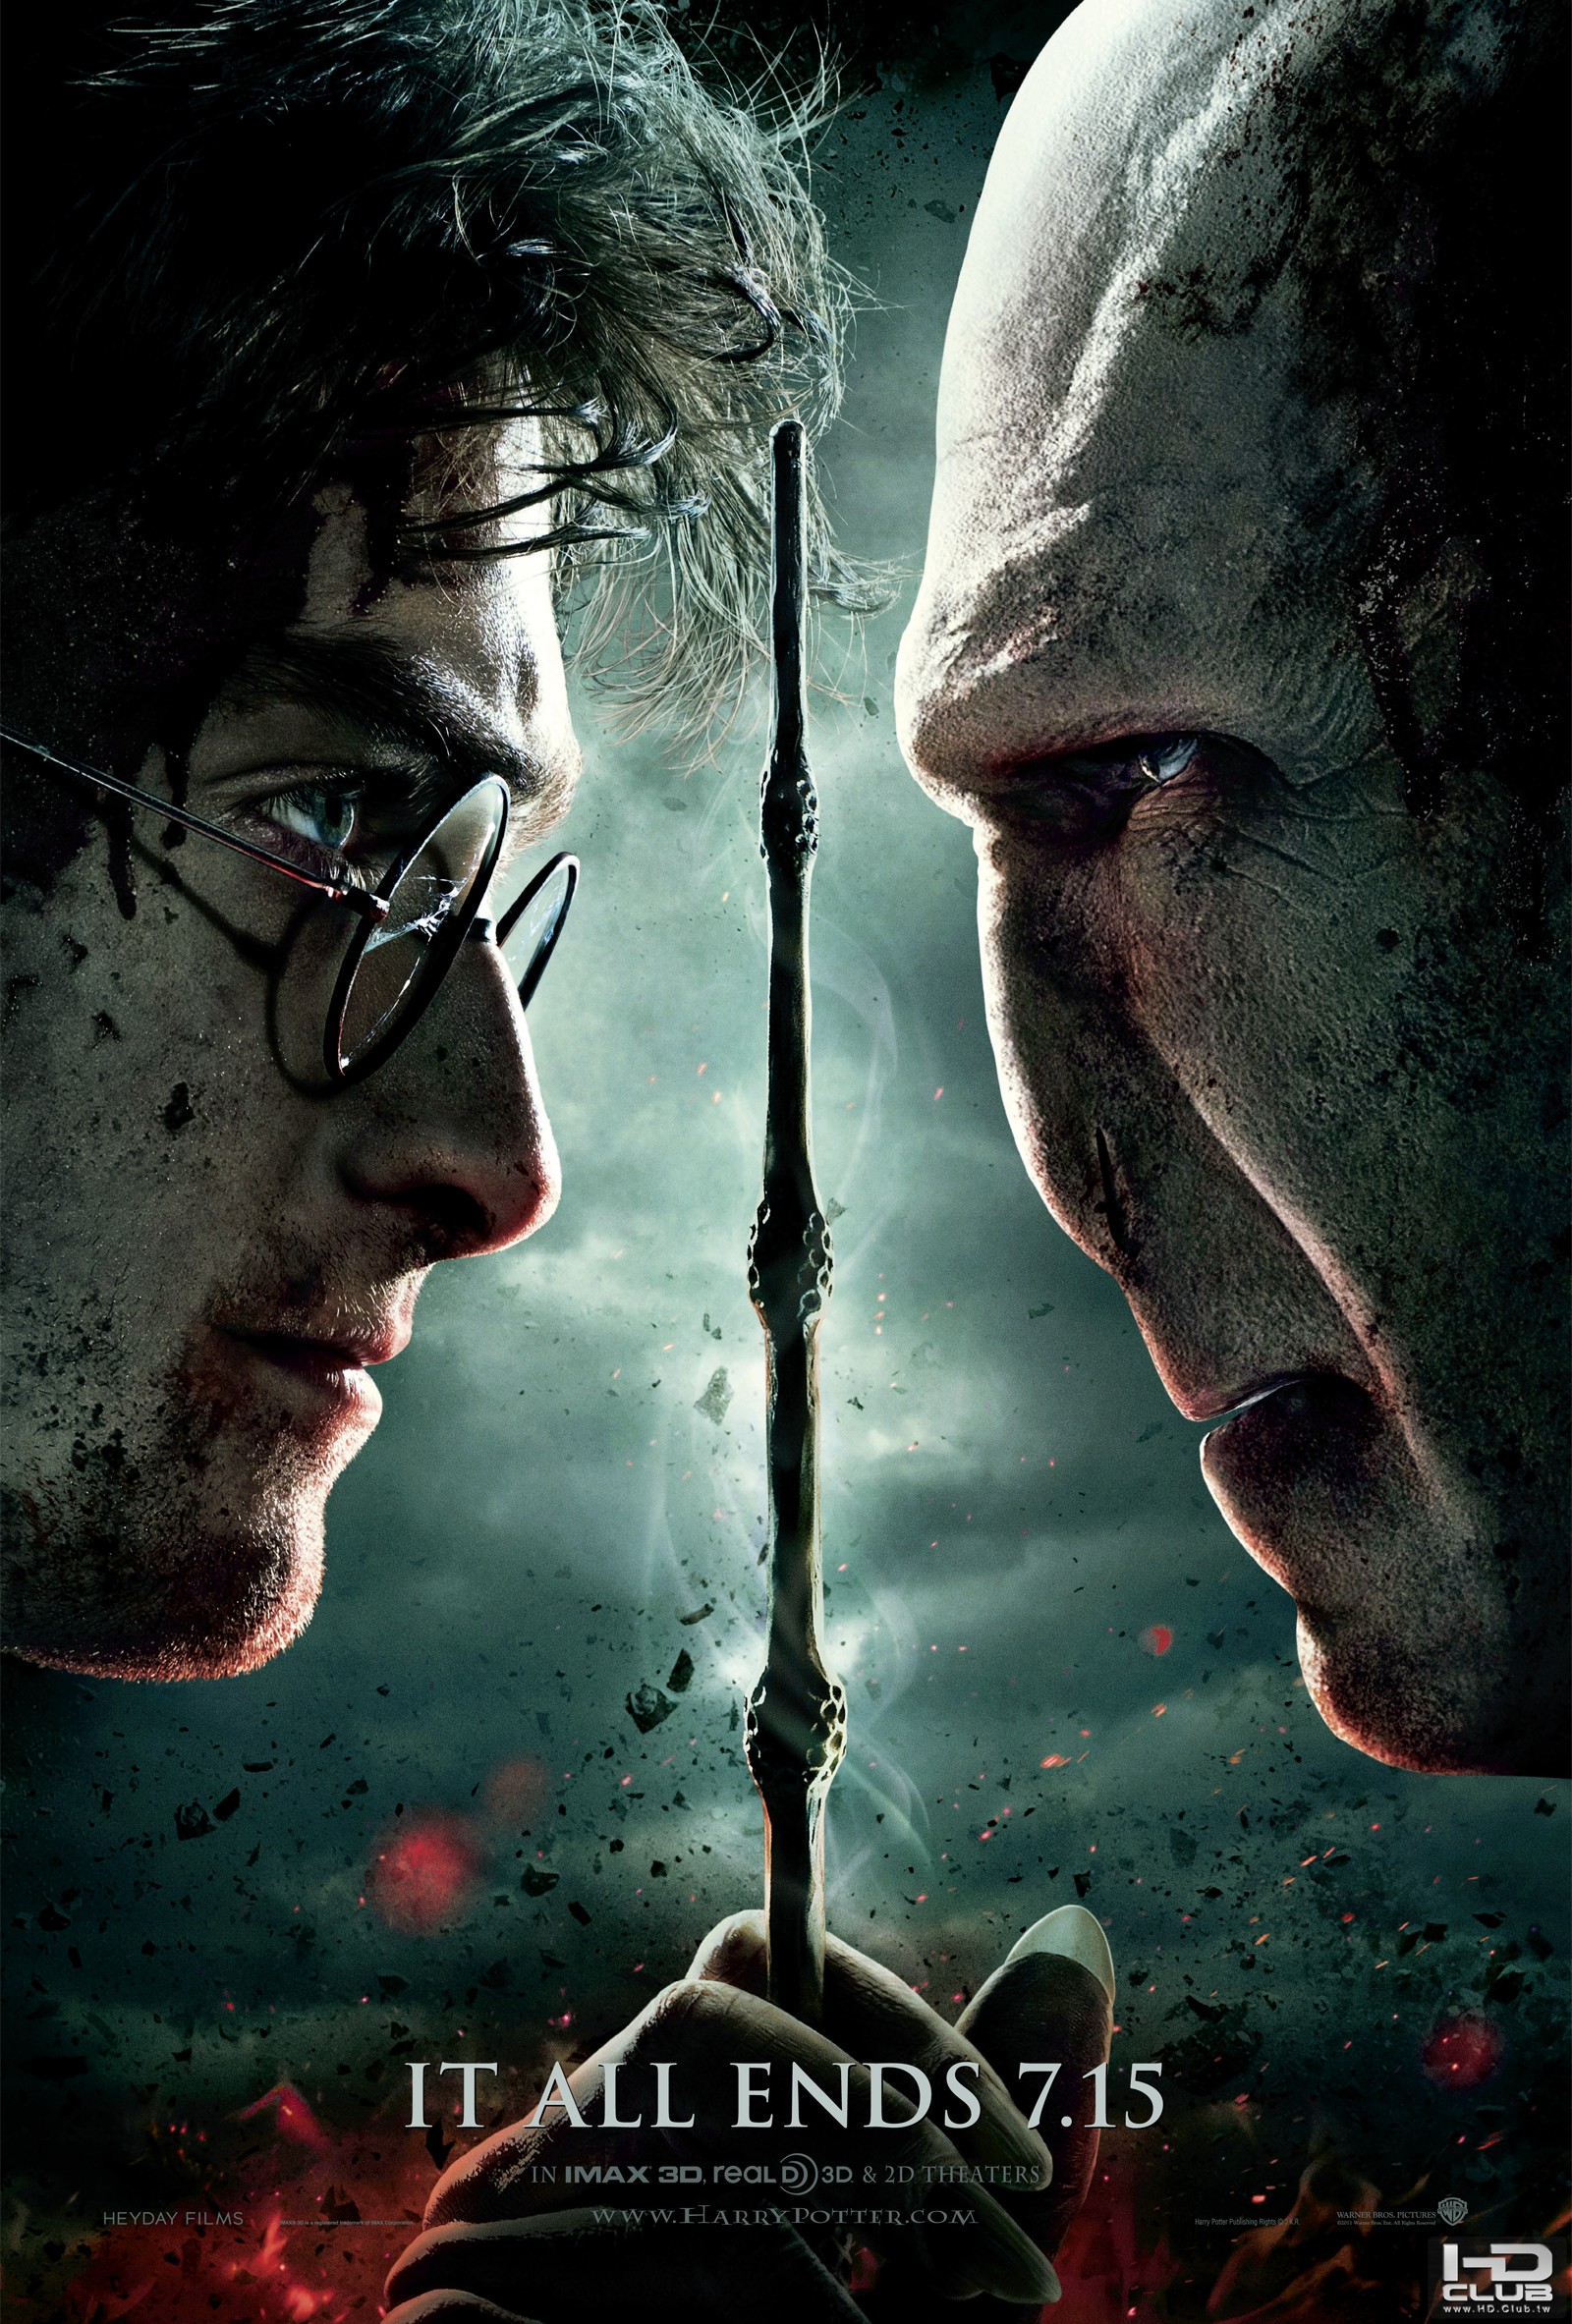 harry-potter-and-the-deathly-hallows-part-2-movie-poster-01.jpg